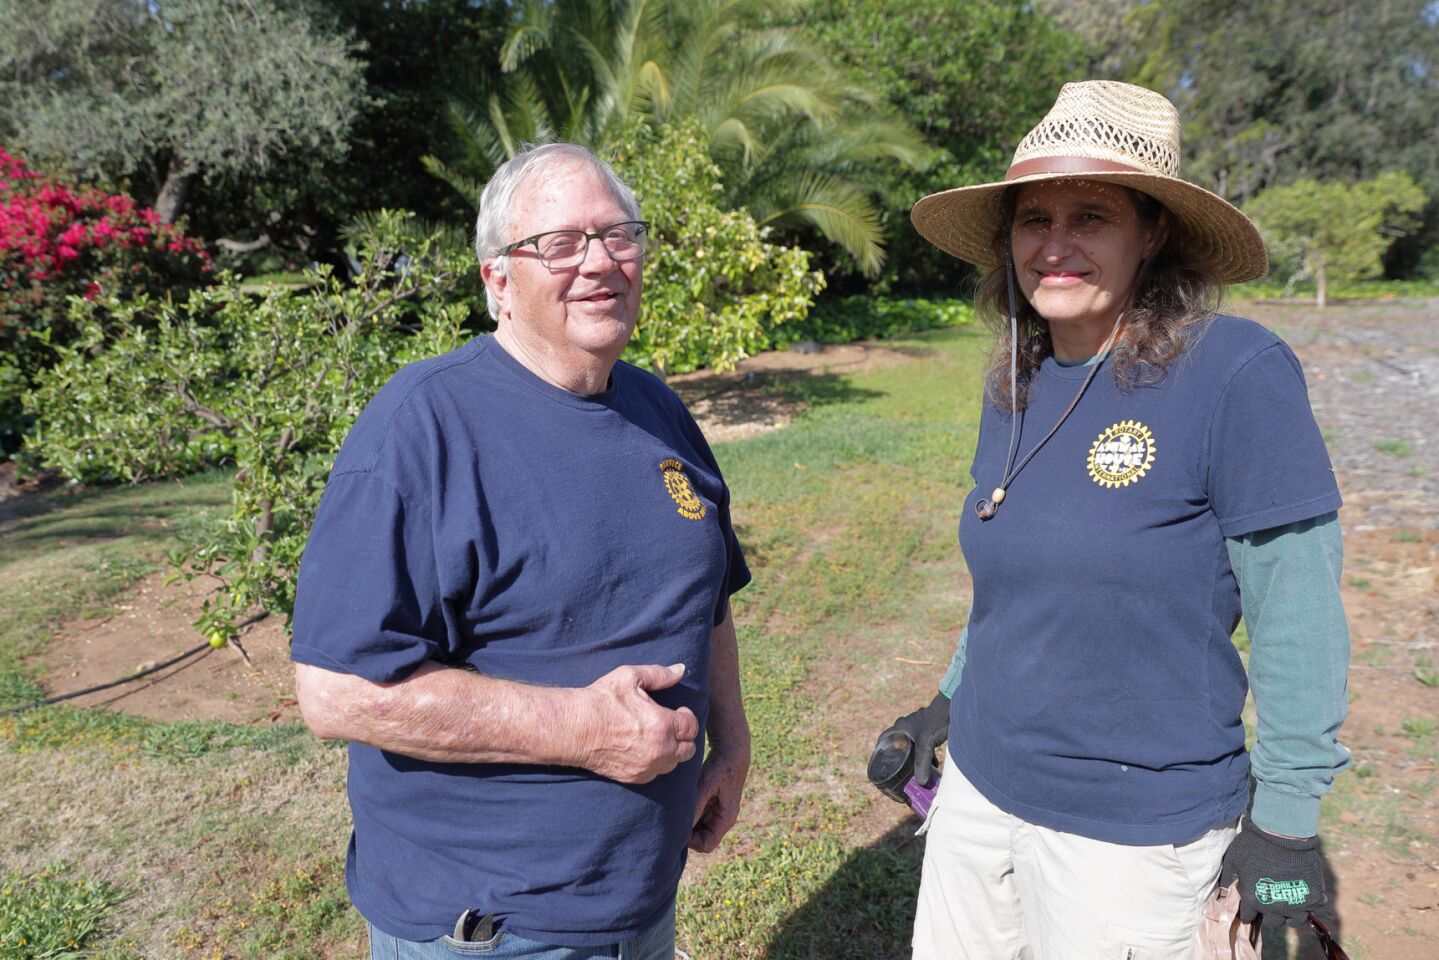 Verne Scholl and Daphne Fletcher from the Encinitas Rotary Club